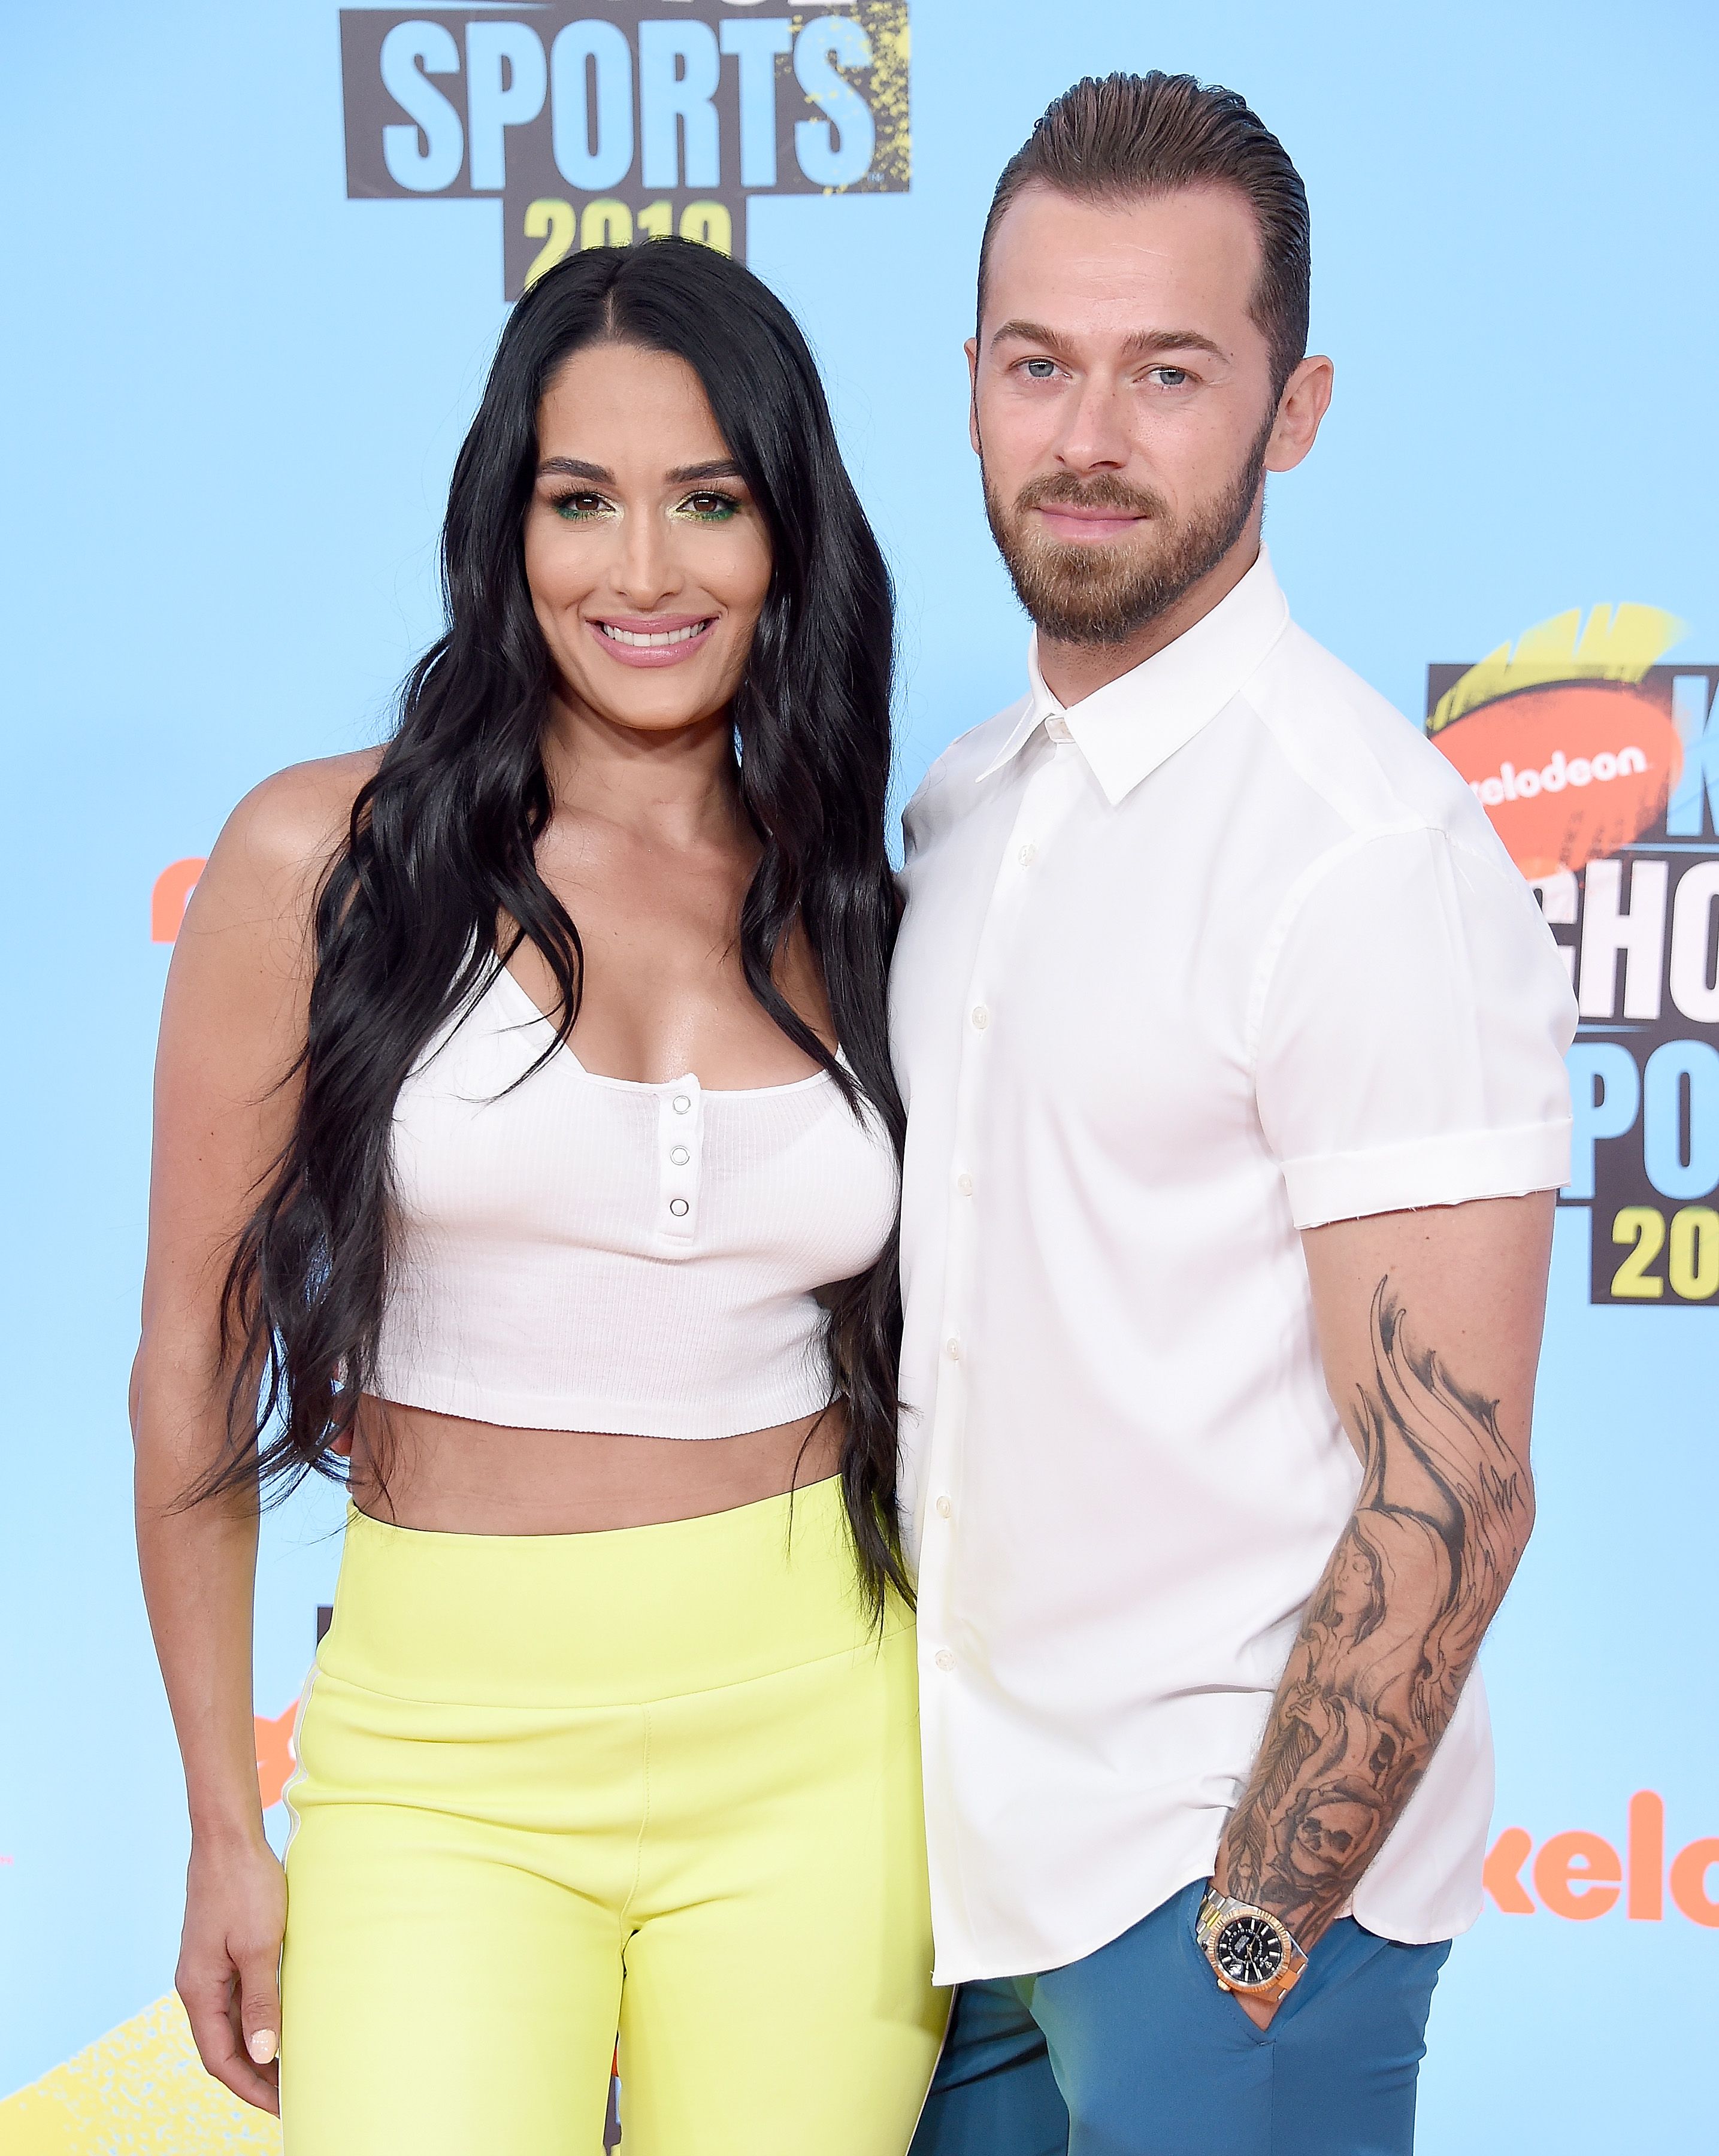 Nikki Bella and Artem Chigvintsev at the Nickelodeon Kids' Choice Sports event in 2019, in Santa Monica, California | Source: Getty Images